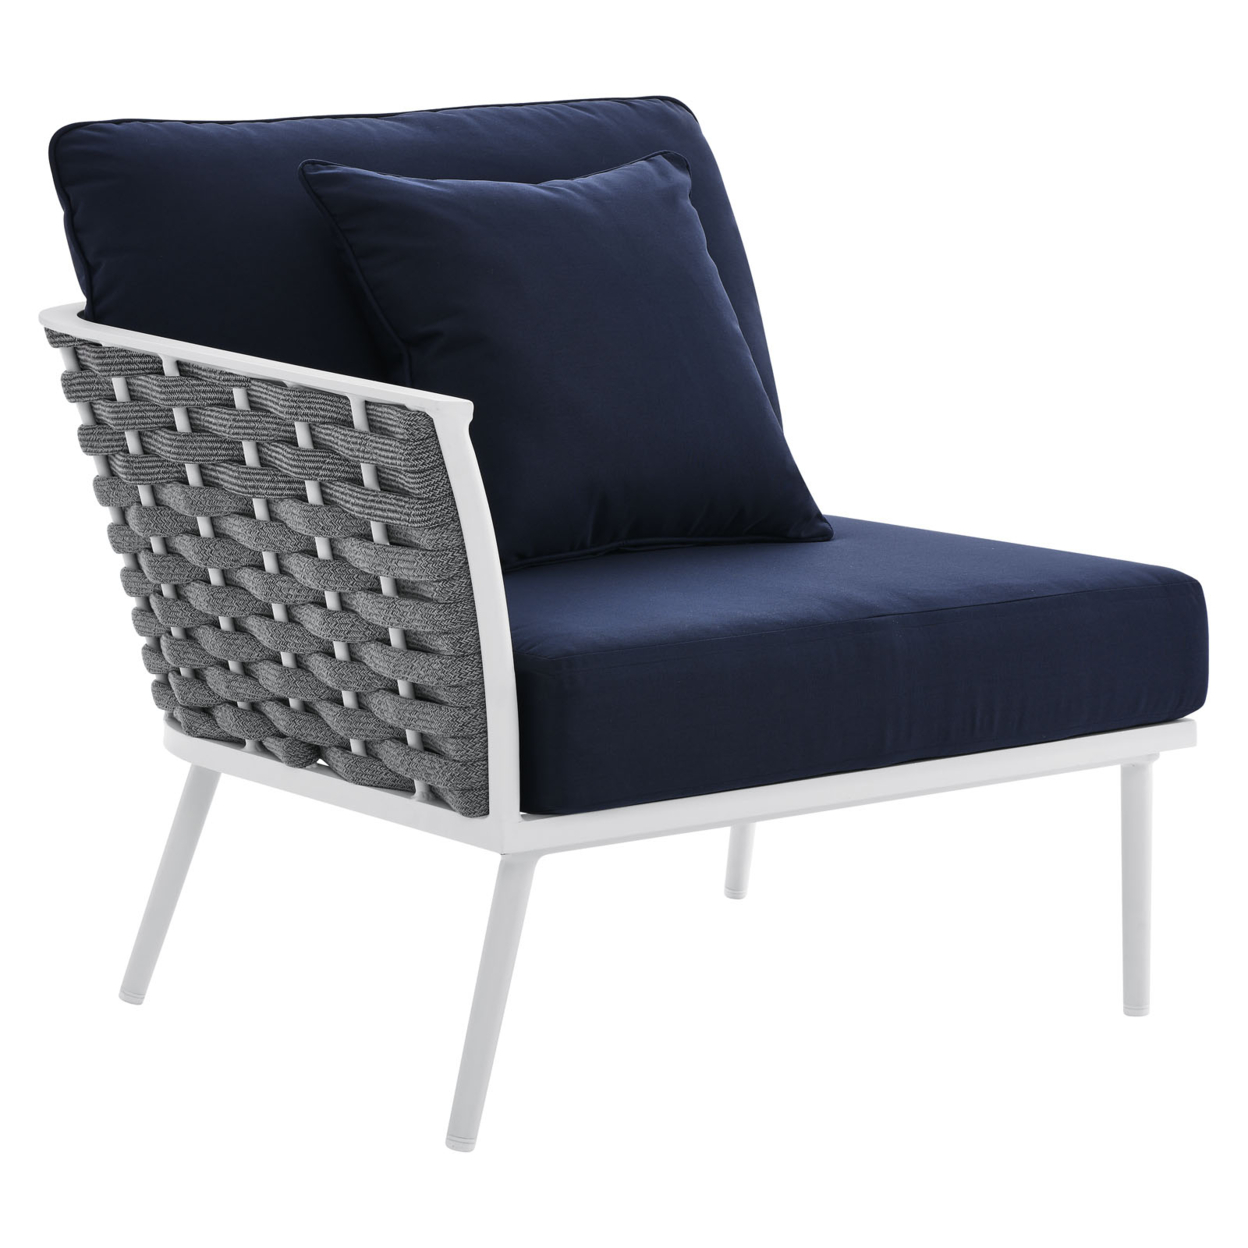 Stance Outdoor Patio Aluminum Left-Facing Armchair, White Navy